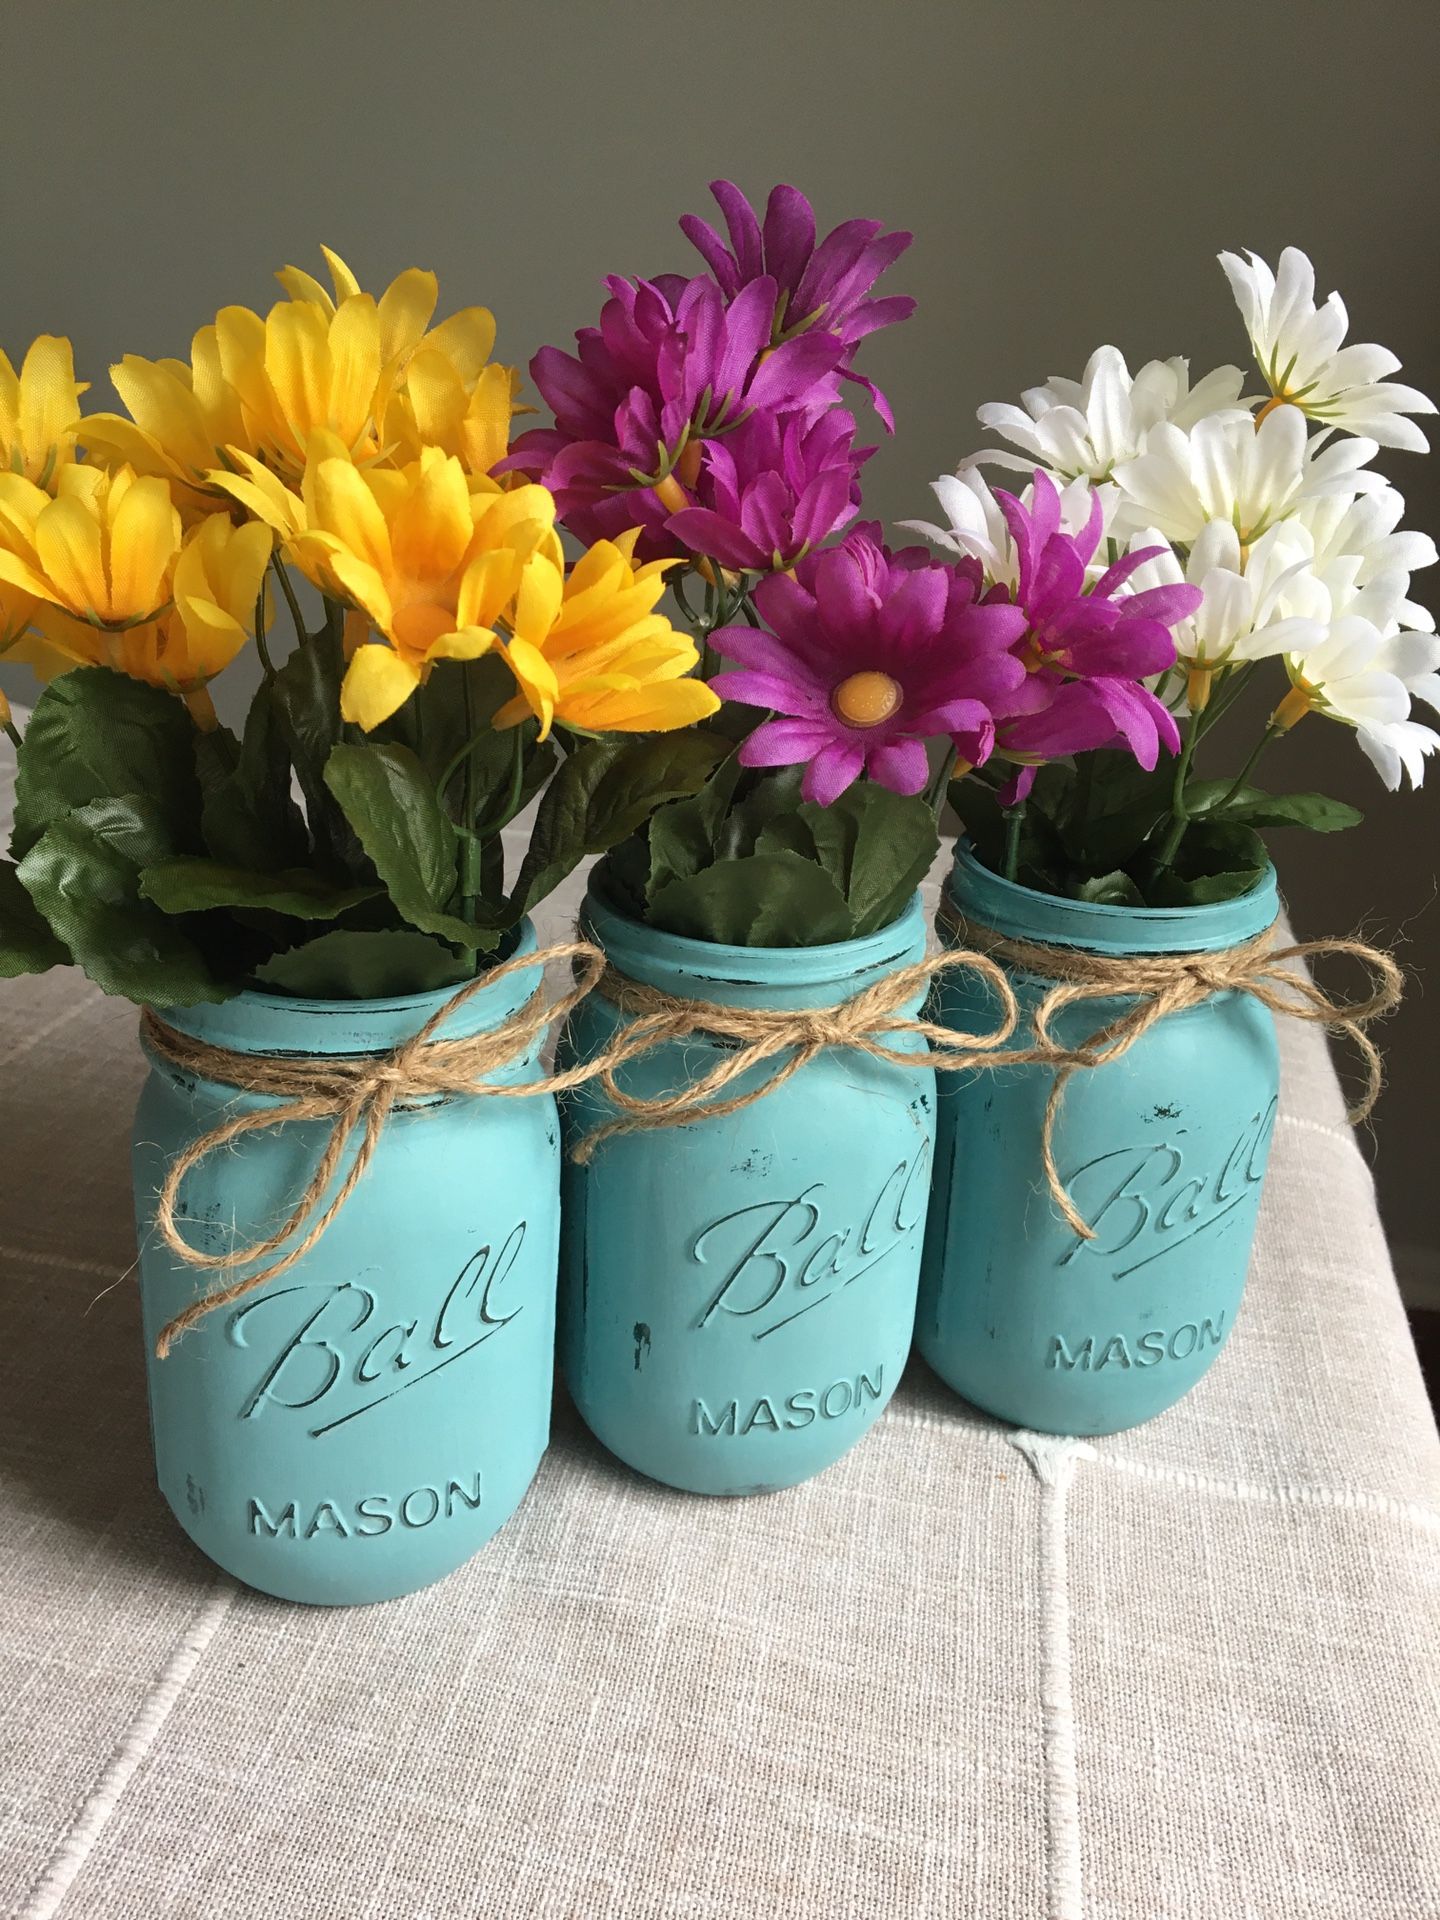 Distressed mason jar vases with silk flowers included! $13 for 3 you pick the jar/flower colors